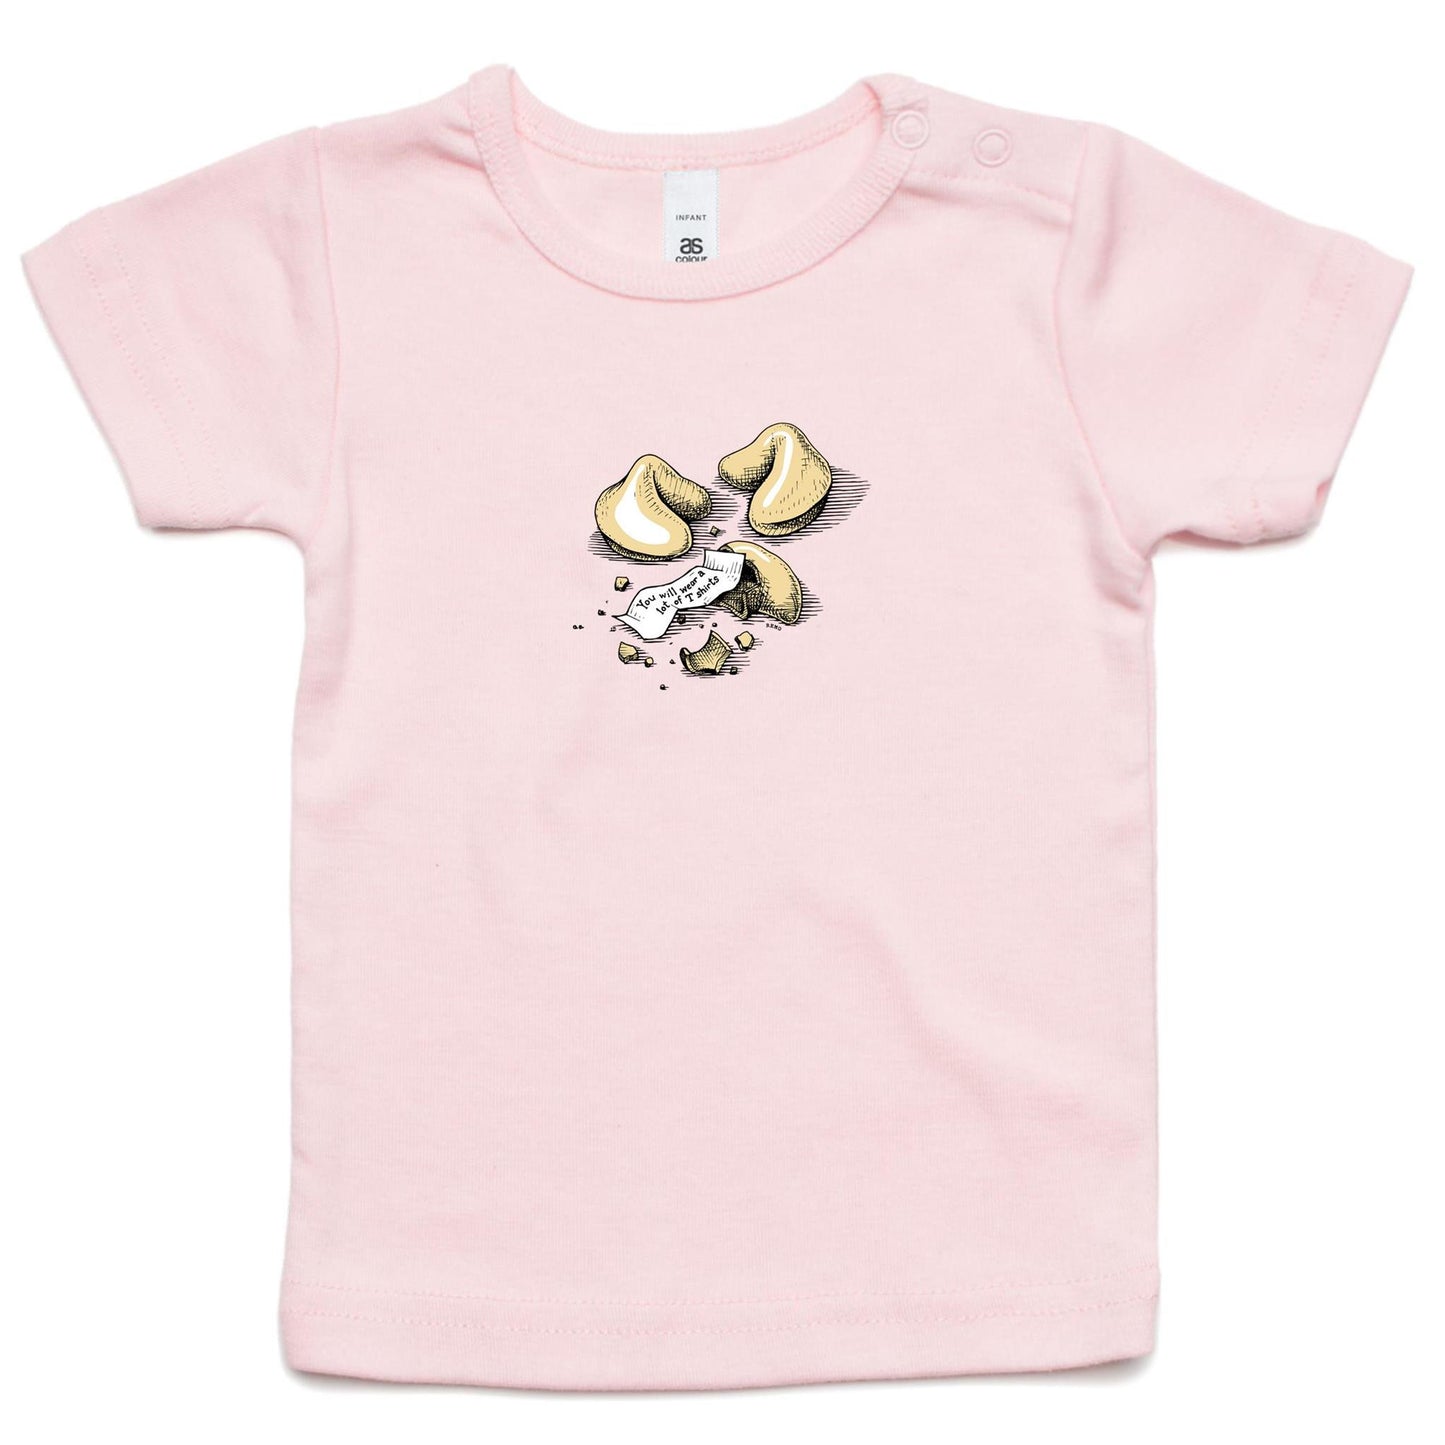 Fortune Cookies T Shirts for Babies